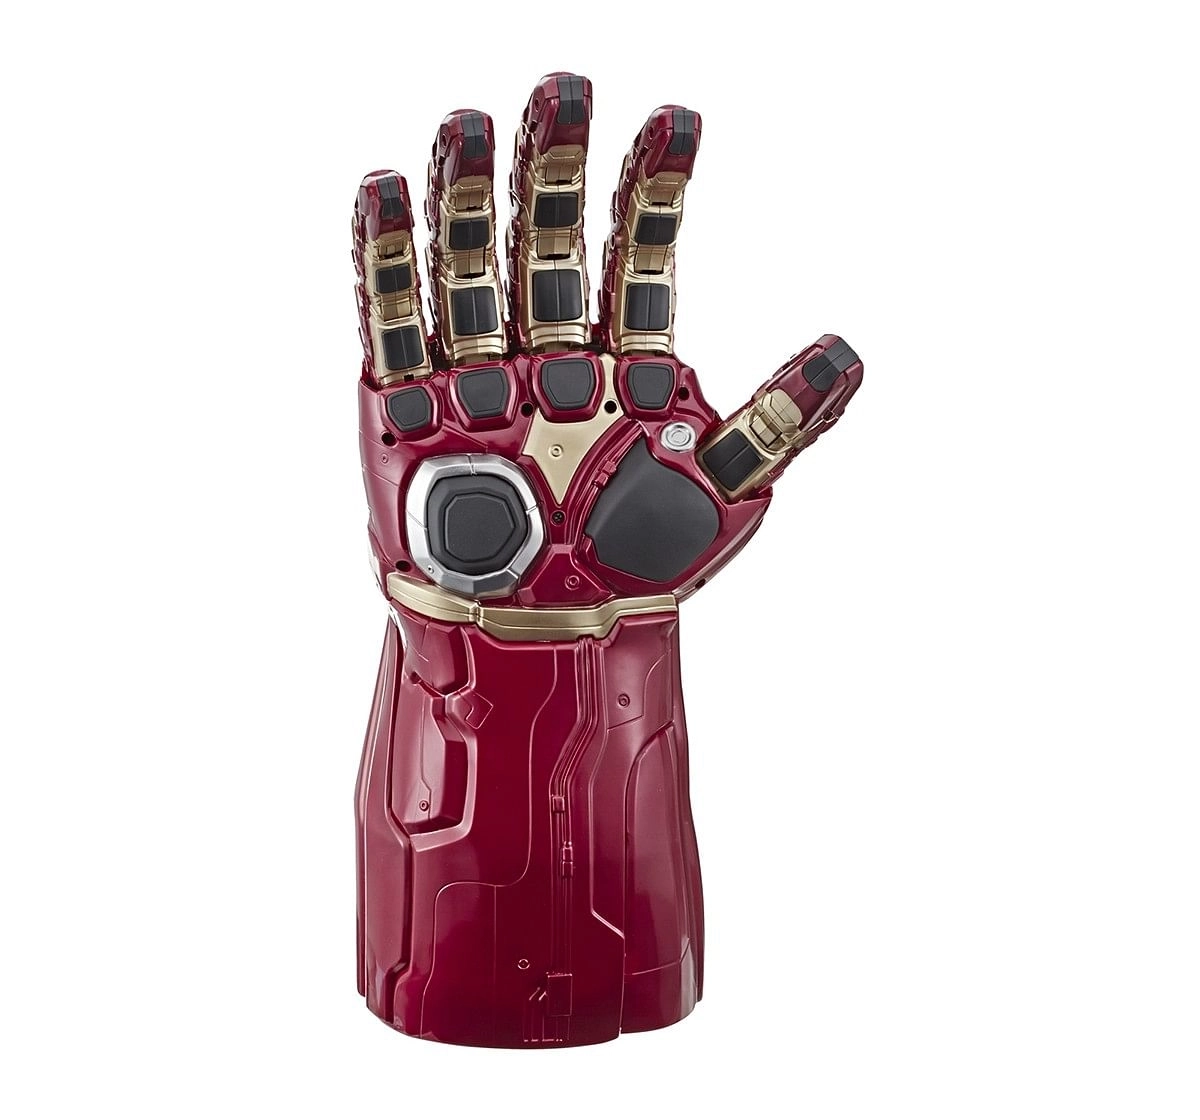 Marvel Legends Series Avengers Electronic Power Gauntlet Action Figure Play Sets for Kids age 18Y+ 